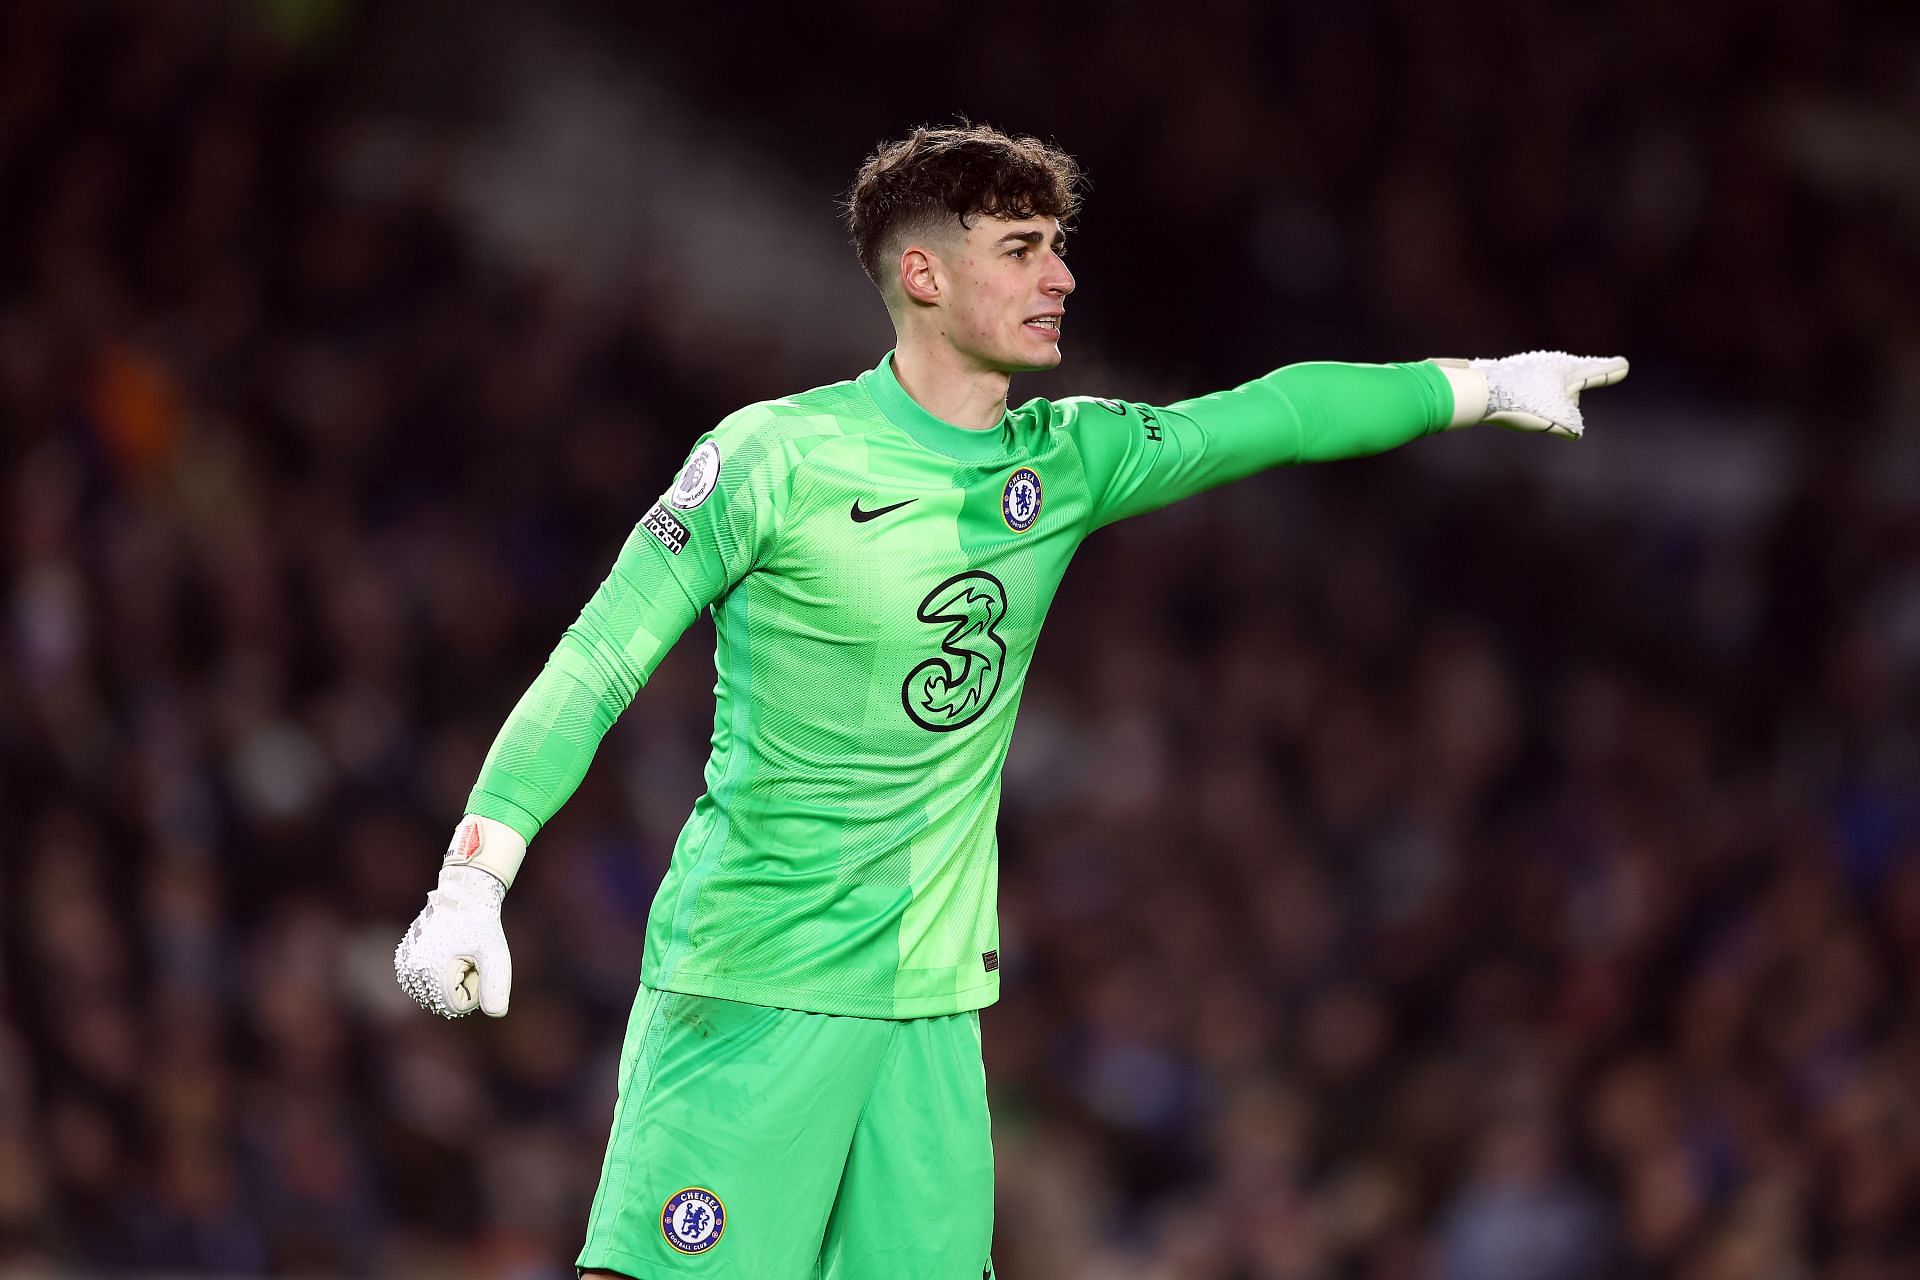 Chelsea are willing to offload Kepa Arrizabalaga this summer.